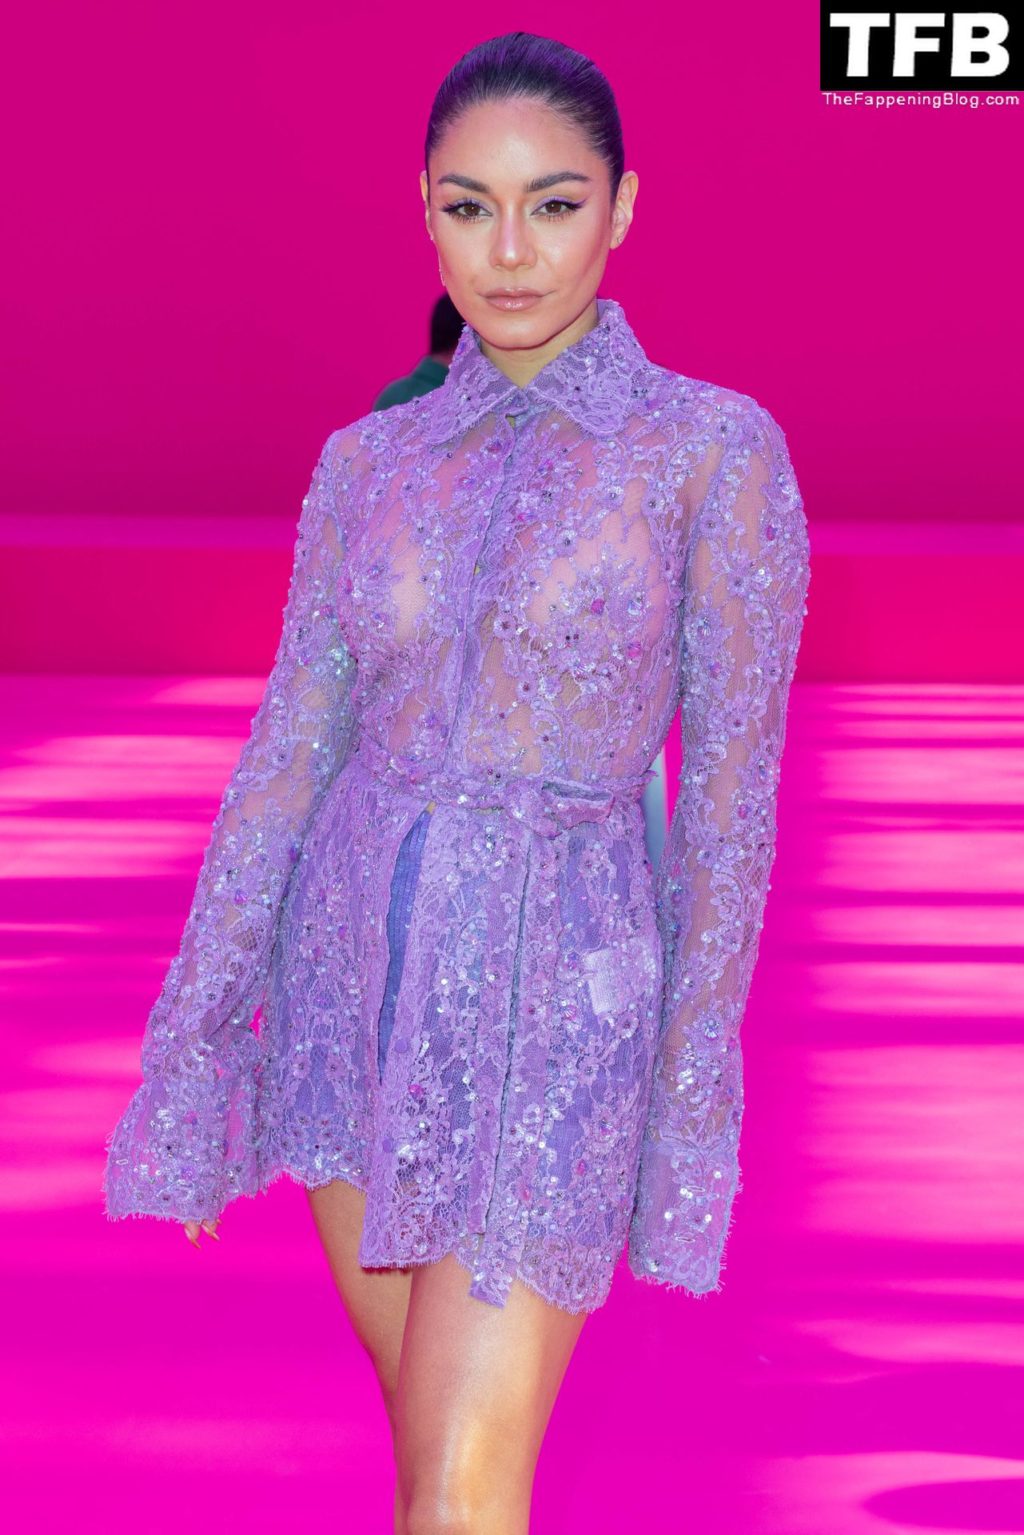 Vanessa Hudgens Sexy The Fappening Blog 5 1024x1535 - Vanessa Hudgens Looks Hot in a See-Through Dress at the Valentino Womenswear Show (54 Photos)